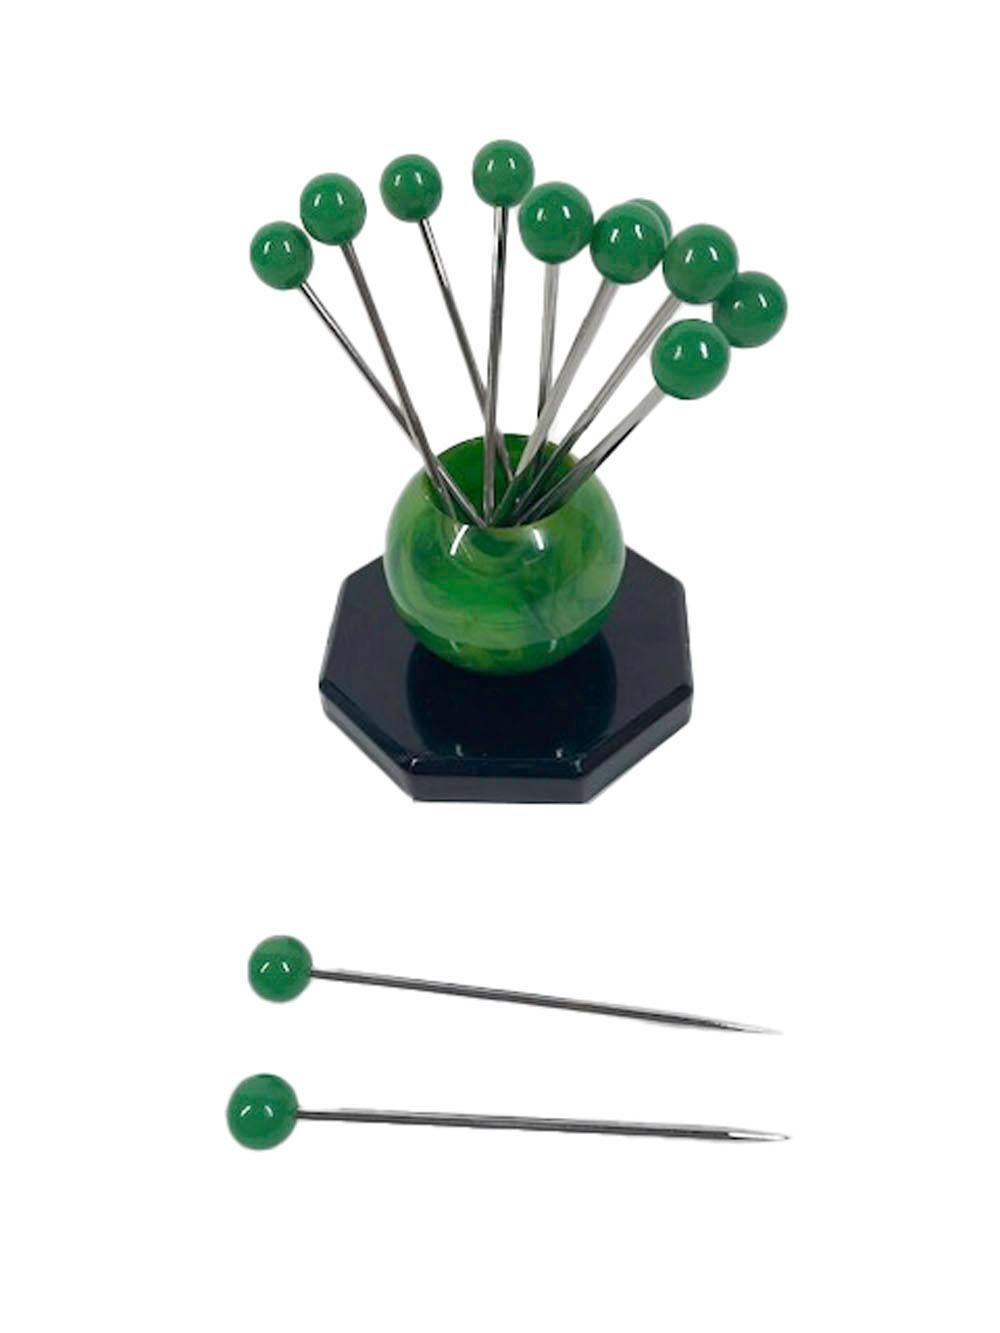 French Art Deco cocktail picks and stand, 12 stainless steel picks with green ball tops in a mottled jade green Bakelite orb standing on an octagonal black Bakelite base.